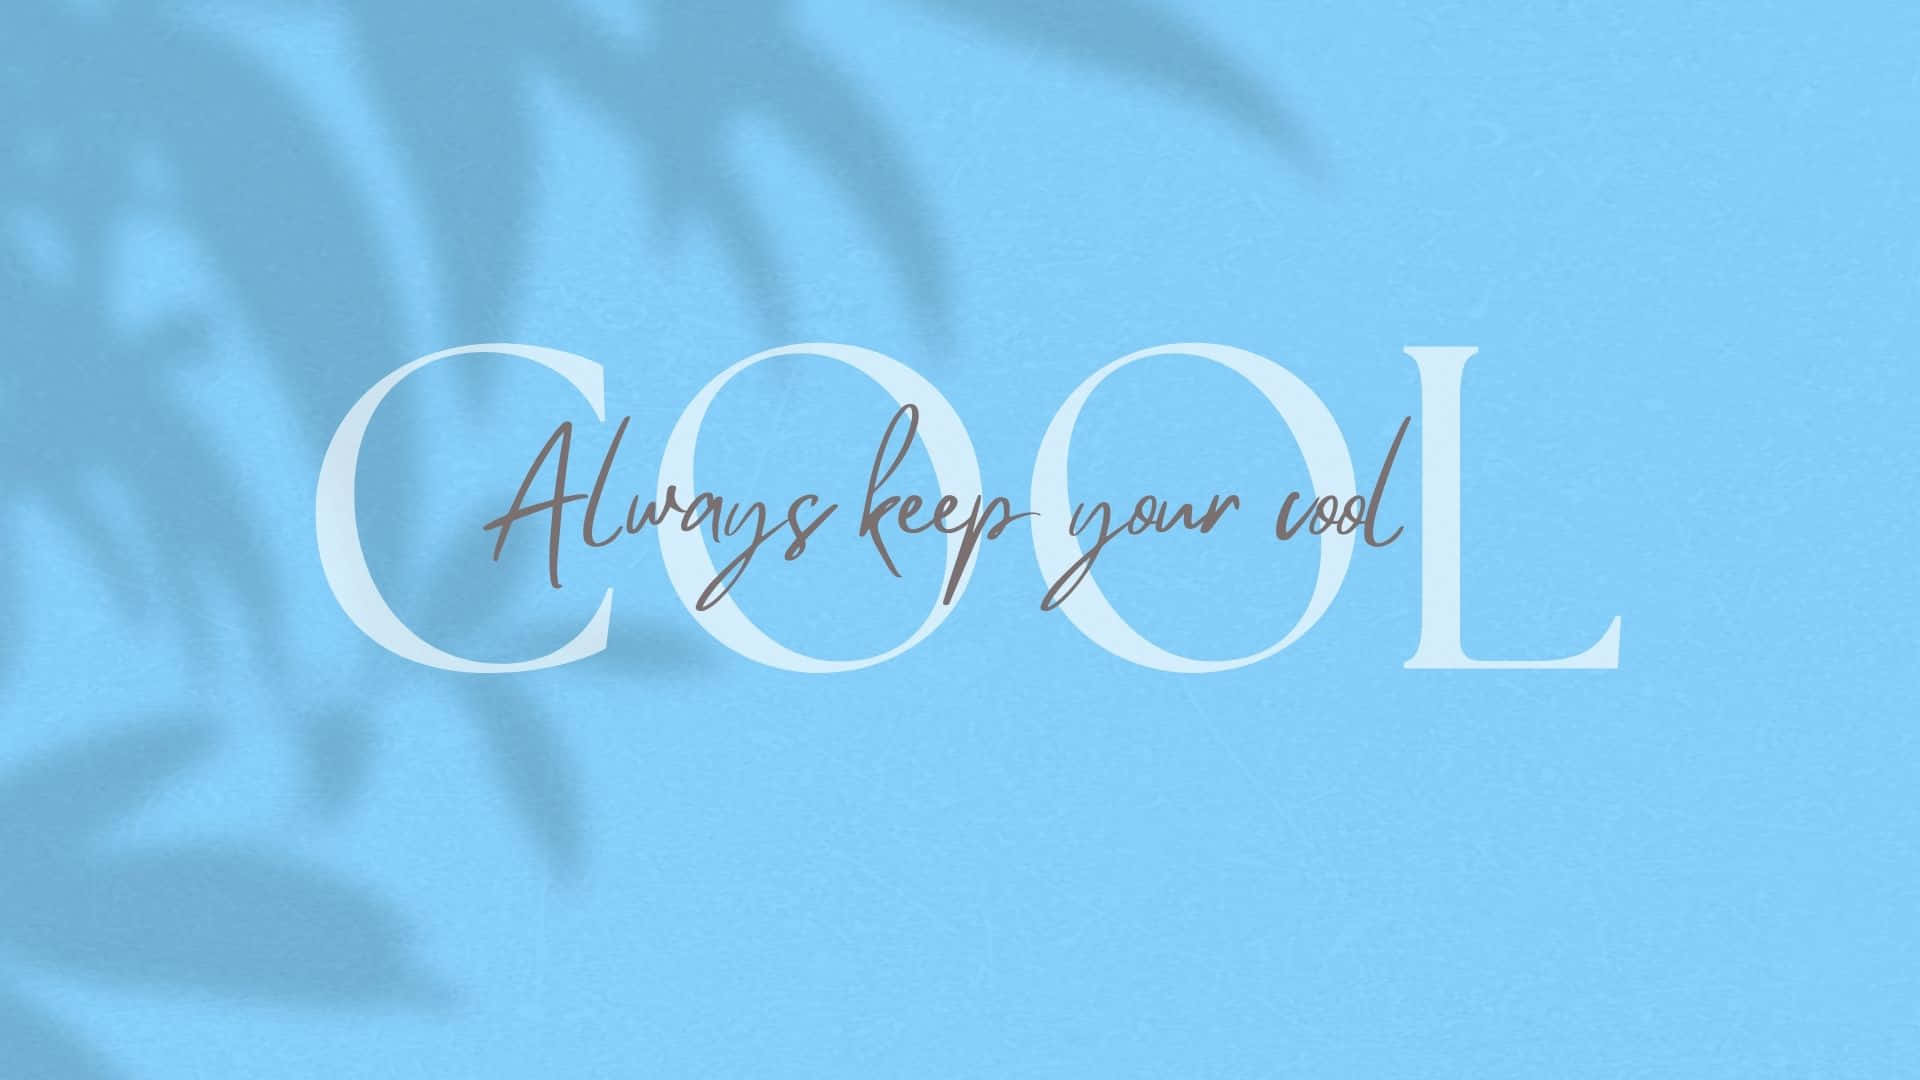 Stay Chill And Keep It Cool Background